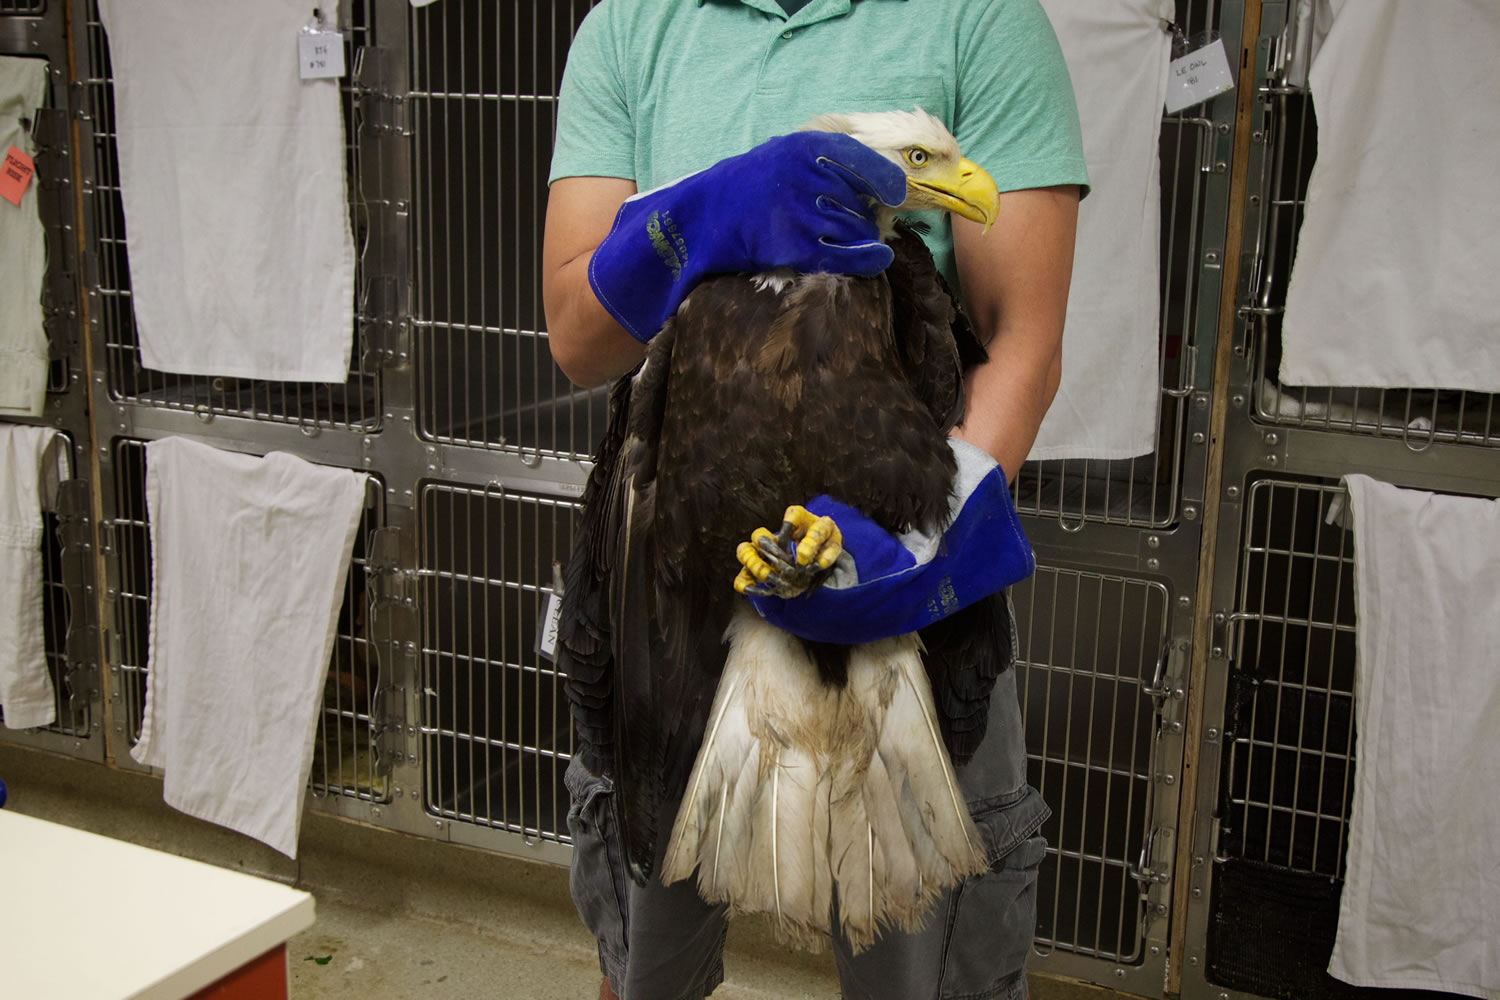 Jesse Serna holds the eagle in May at the care center.